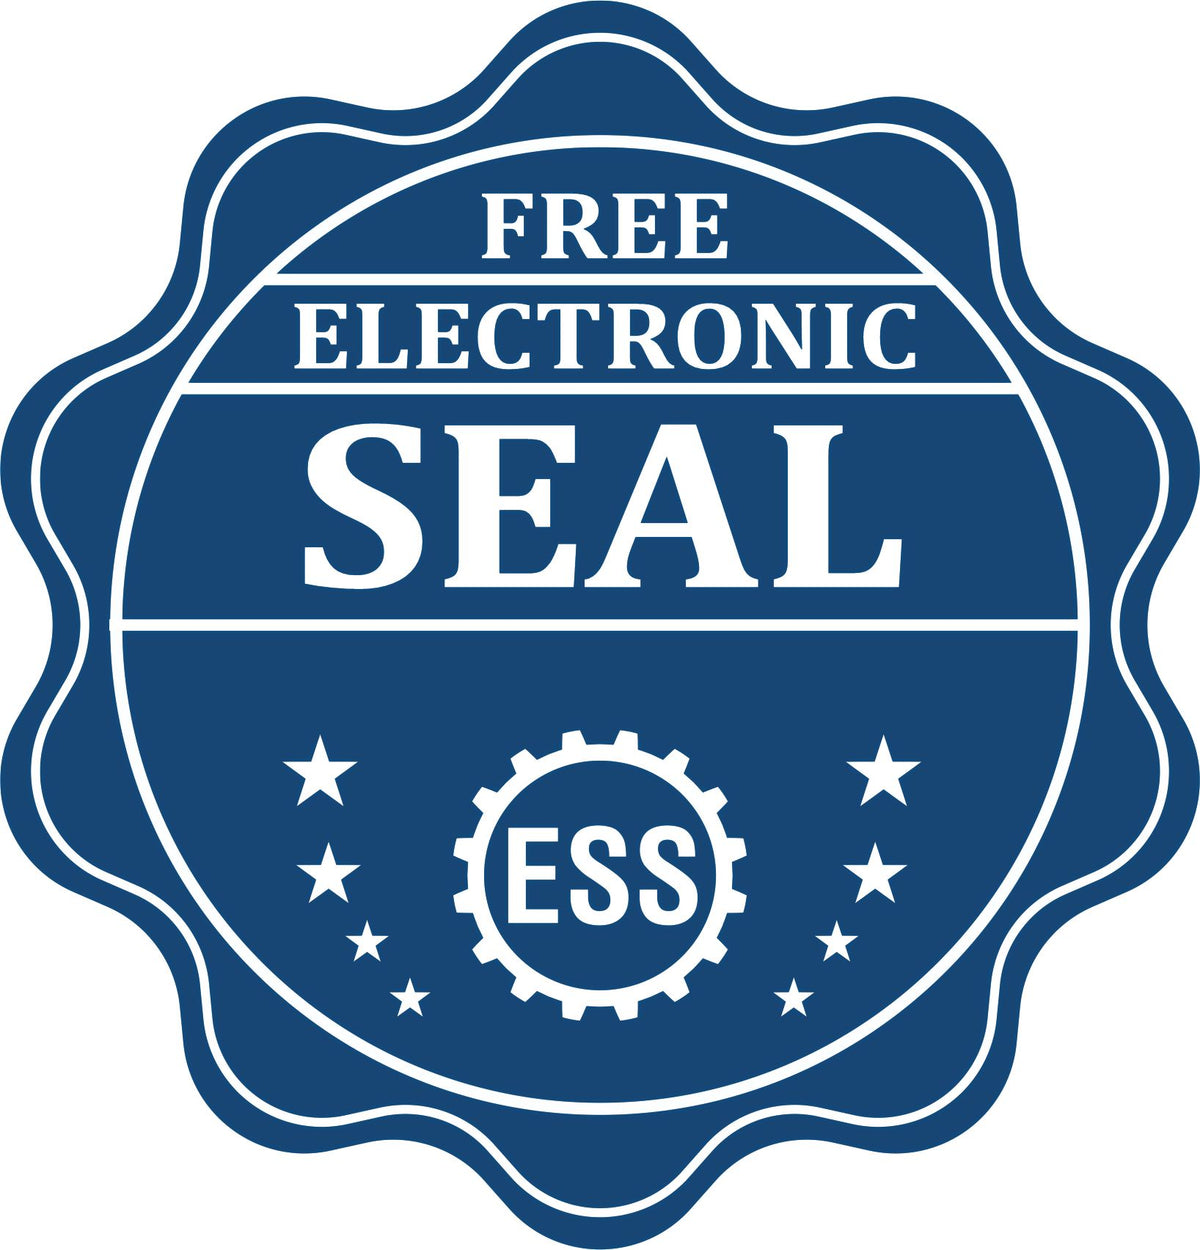 A badge showing a free electronic seal for the MaxLight Premium Pre-Inked Iowa State Seal Notarial Stamp with stars and the ESS gear on the emblem.